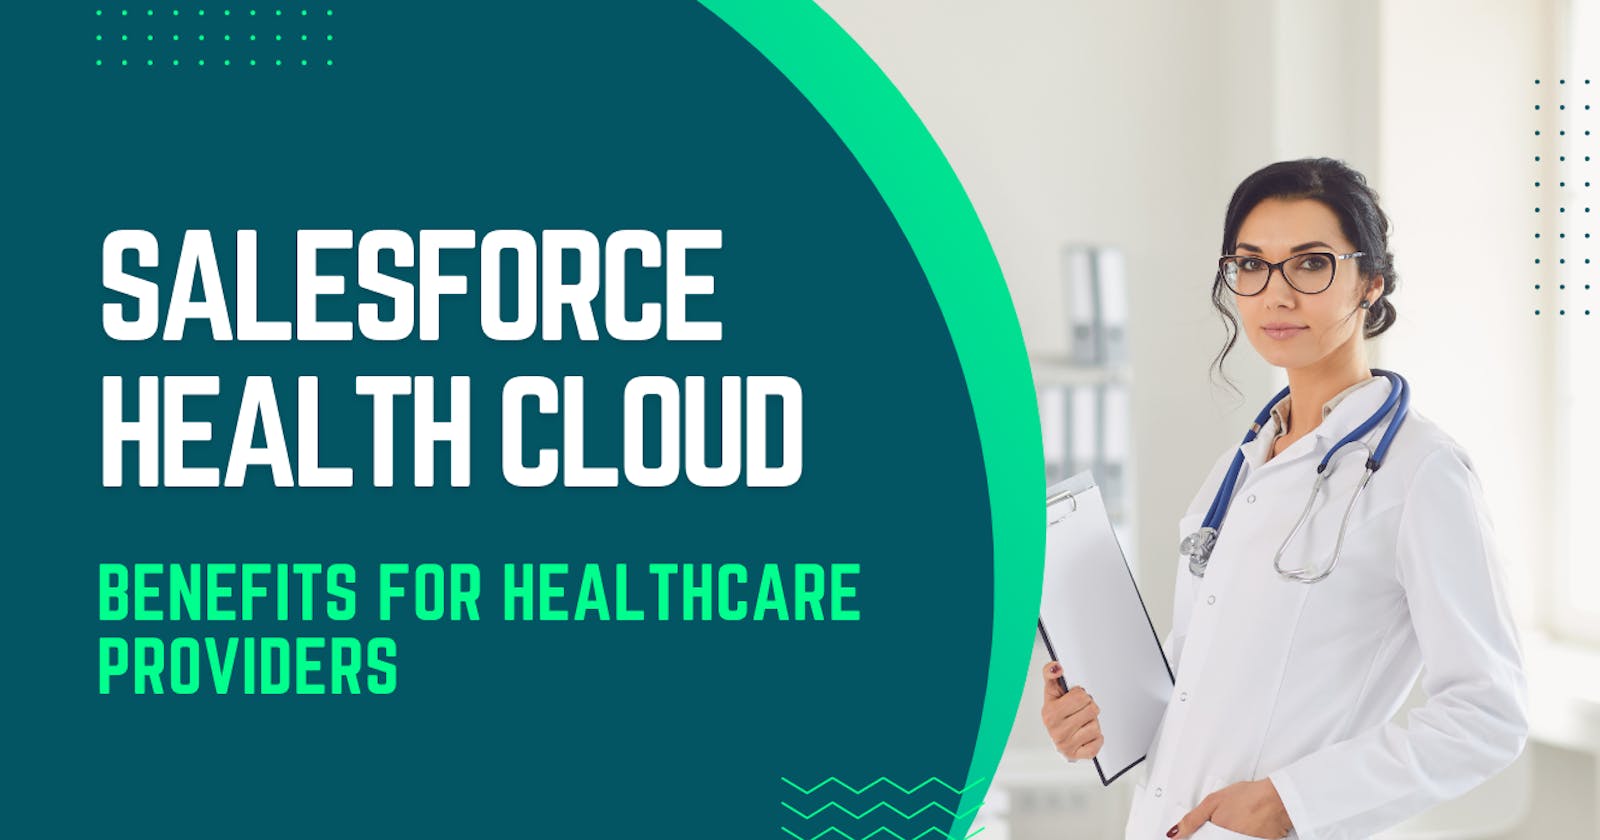 7 Salesforce Health Cloud Benefits for Healthcare Providers